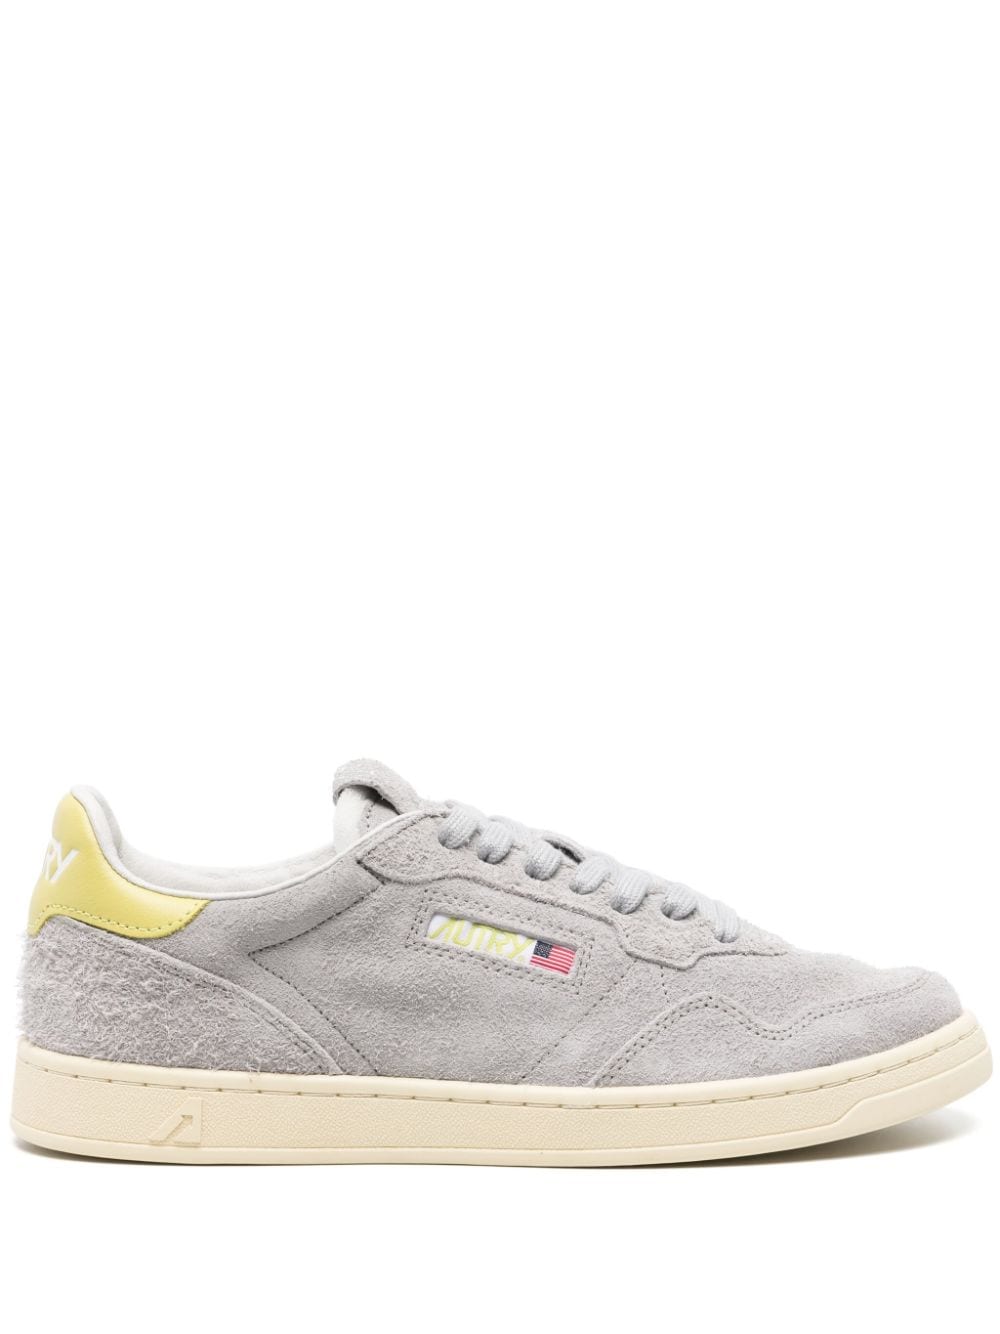 Autry Medalist Flat lace-up sneakers - Grey von Autry